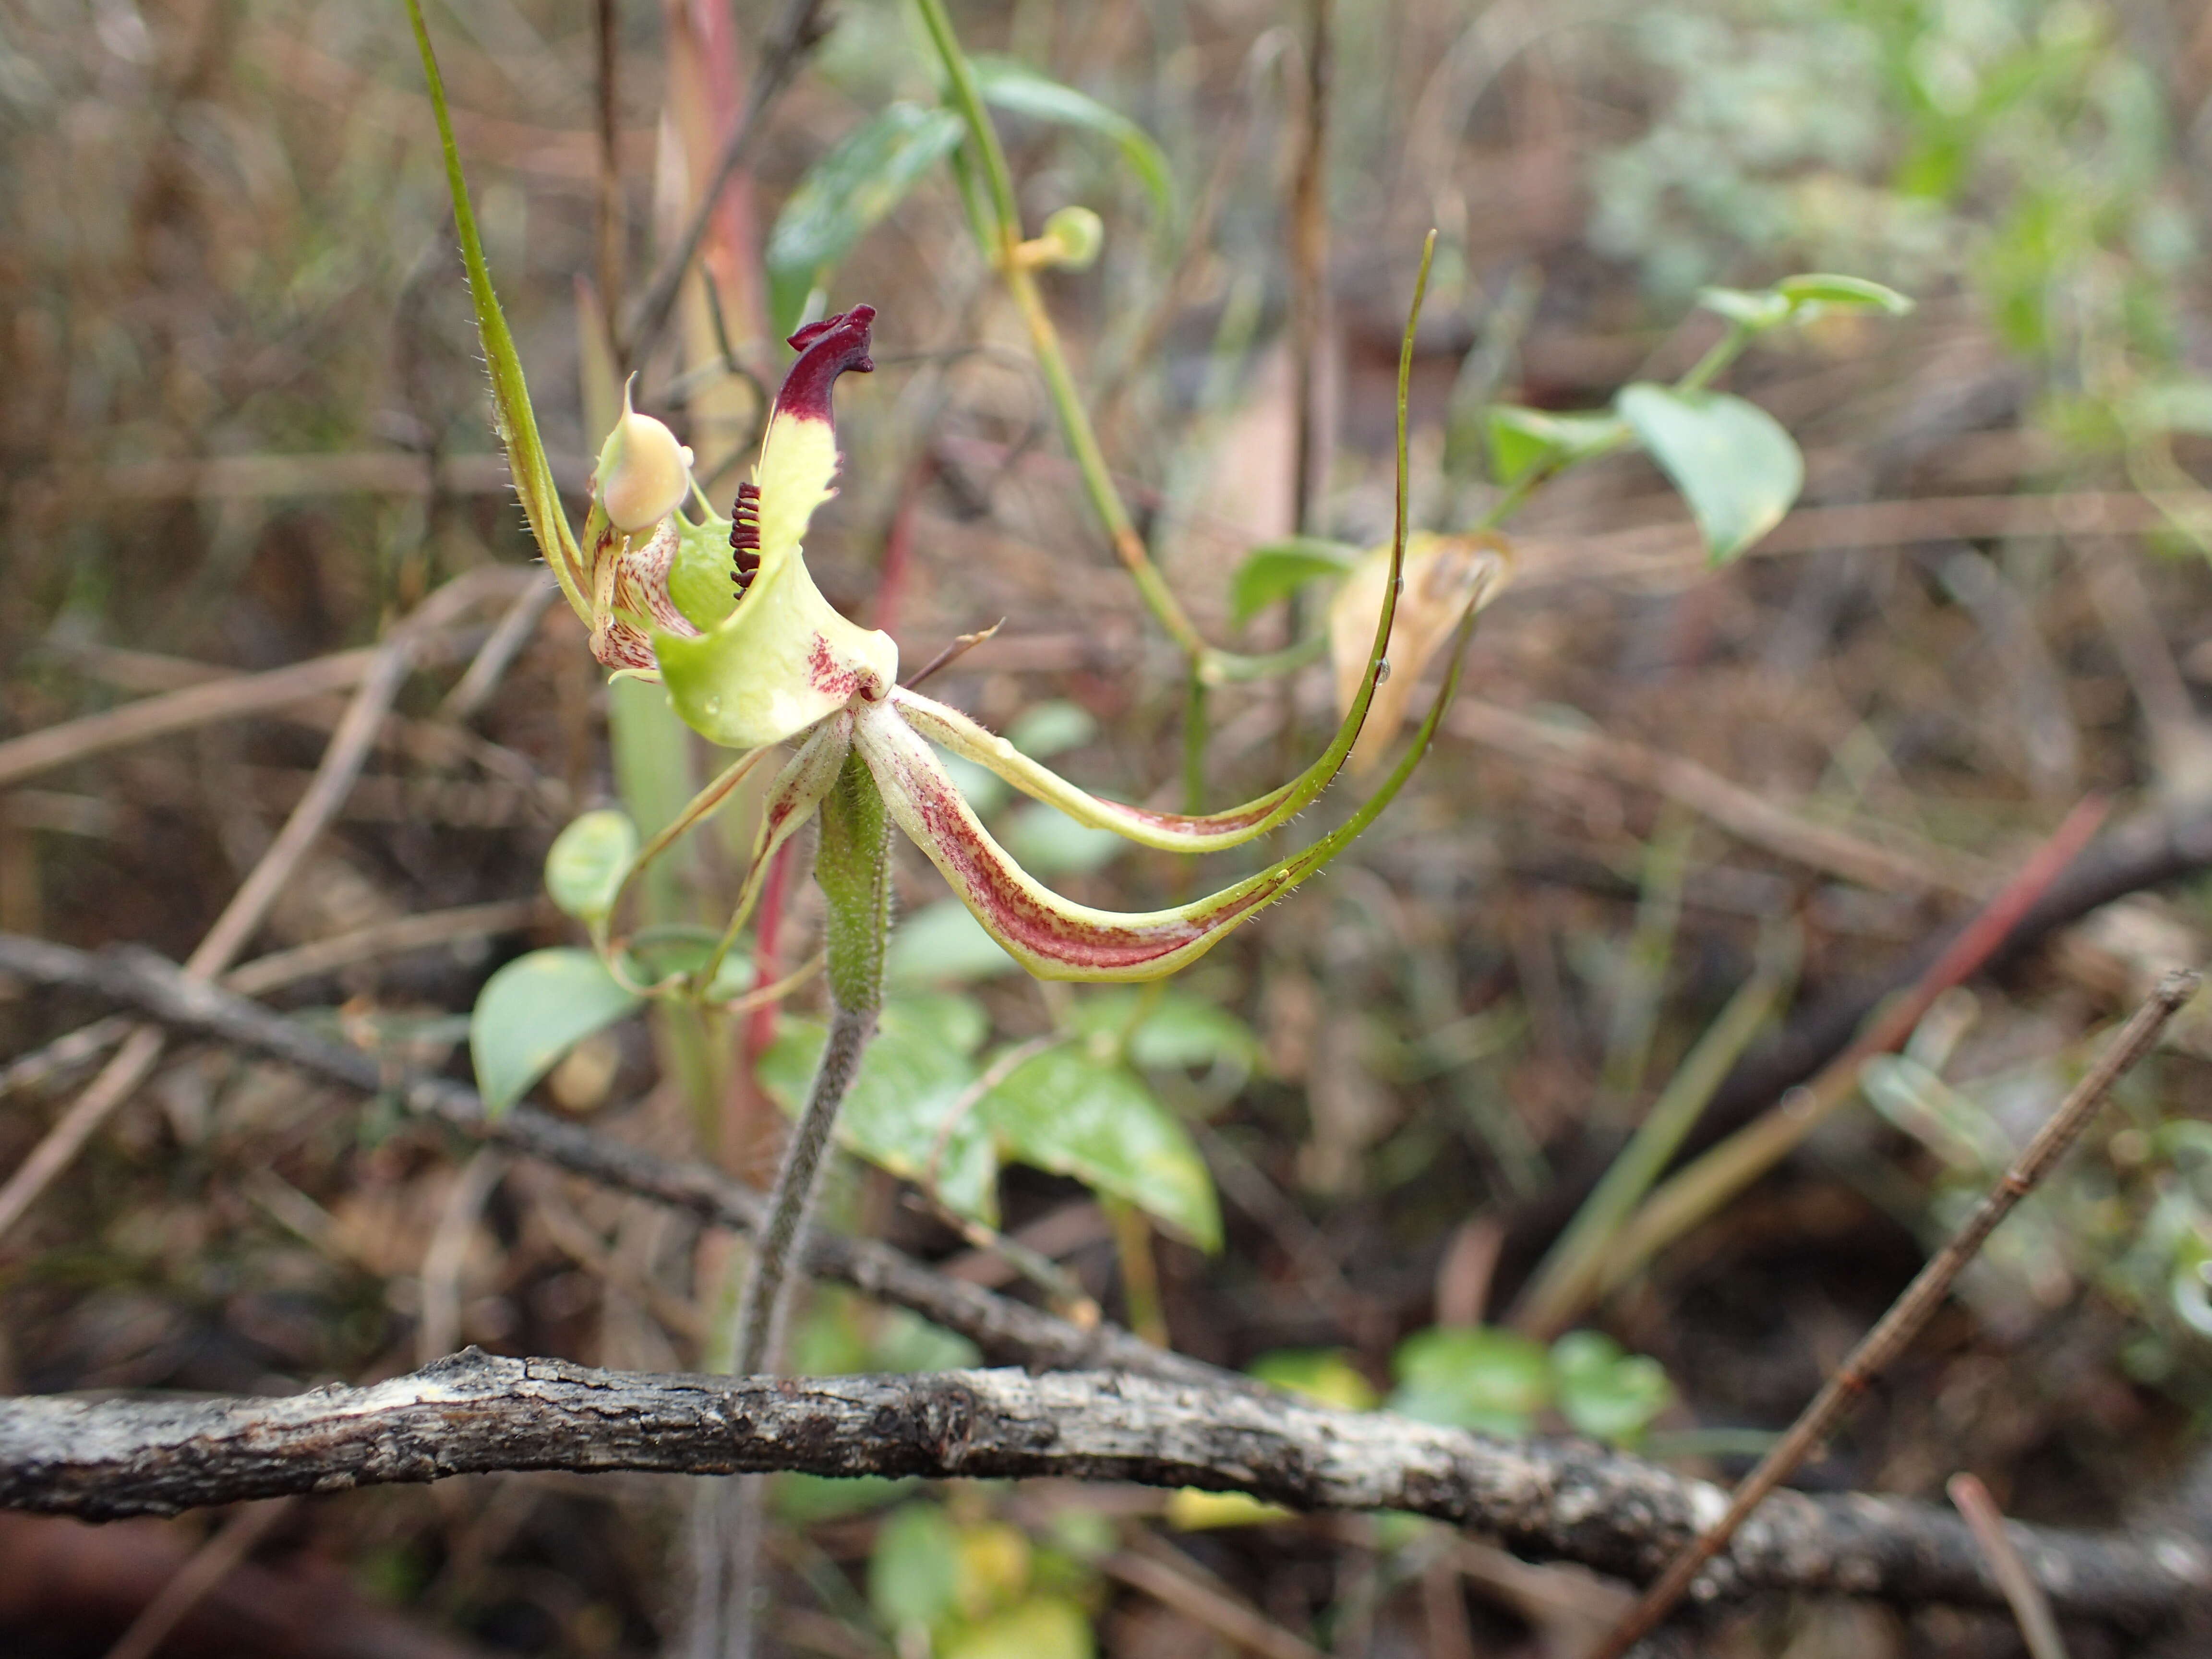 Image of Small mantis orchid